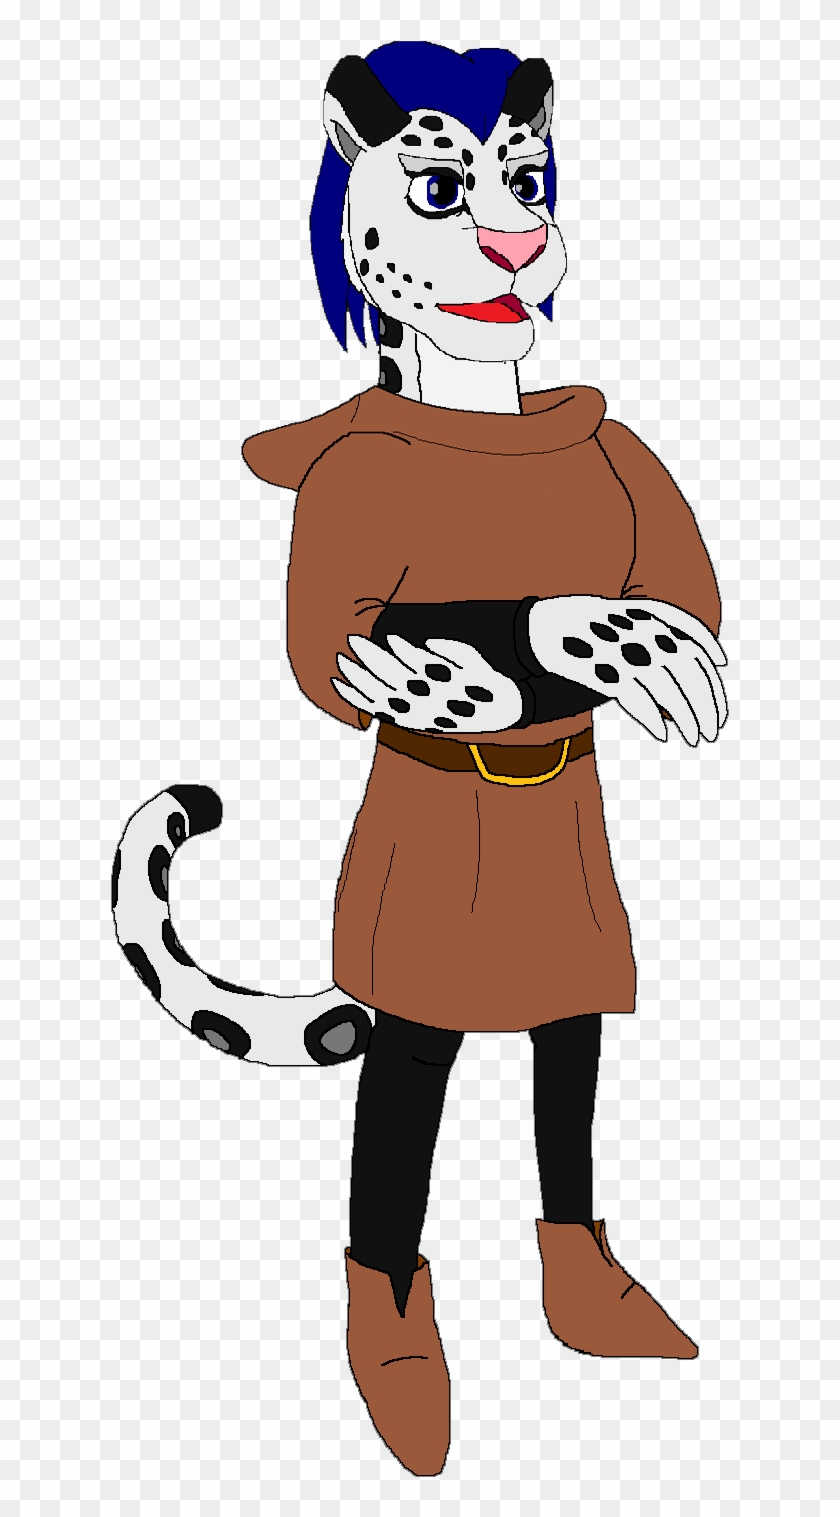 Linde The Snow Leopard By Kylgrv - Cartoon #738461